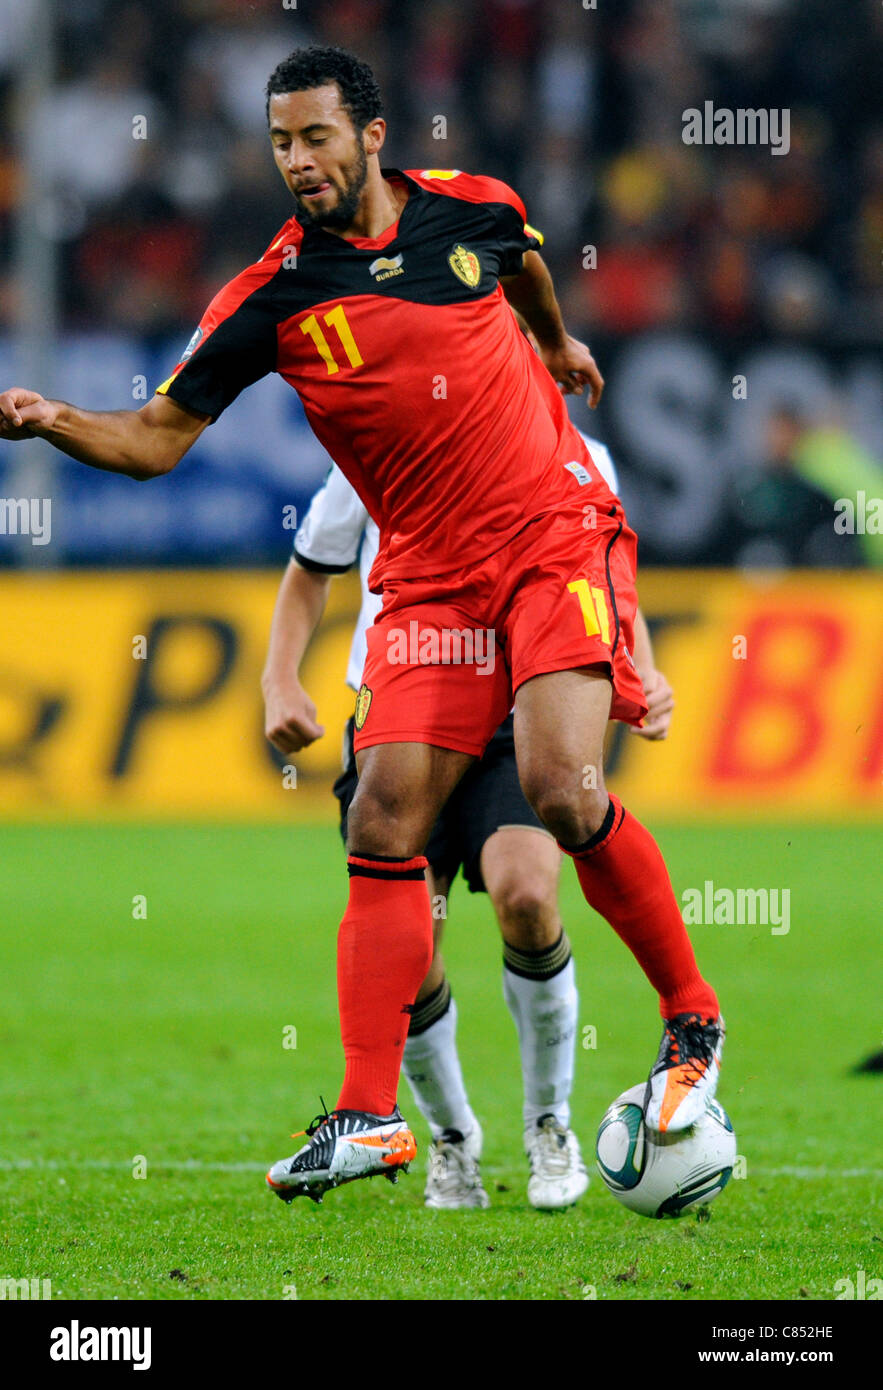 Qualification match for the European Football Championship in Poland and Ukraine 2012; Germany vs Belgium 3:1, at the Esprit Arena in Duesseldorf, Germany: Mousa Dembele (Belgium, Fulham). Stock Photo